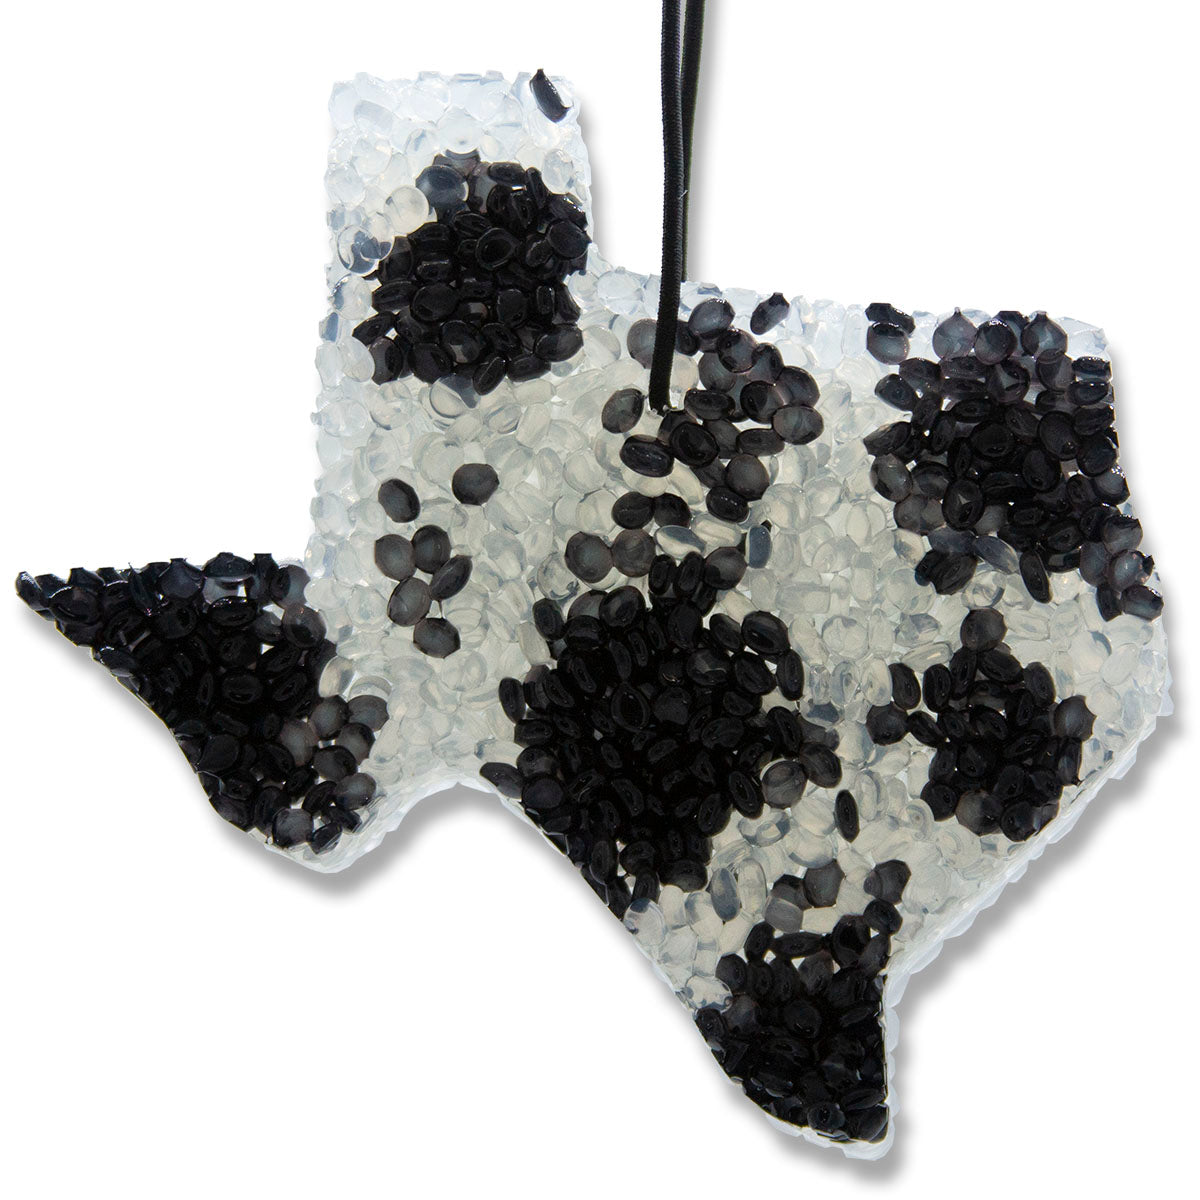 Leather & Lace, Lone Star Candles & More’s Premium Strongly Scented Freshies, Aroma of Genuine Leather and Creamy Vanilla, Car & Air Freshener, USA Made in Texas, Black TX Cowhide 1-Pack